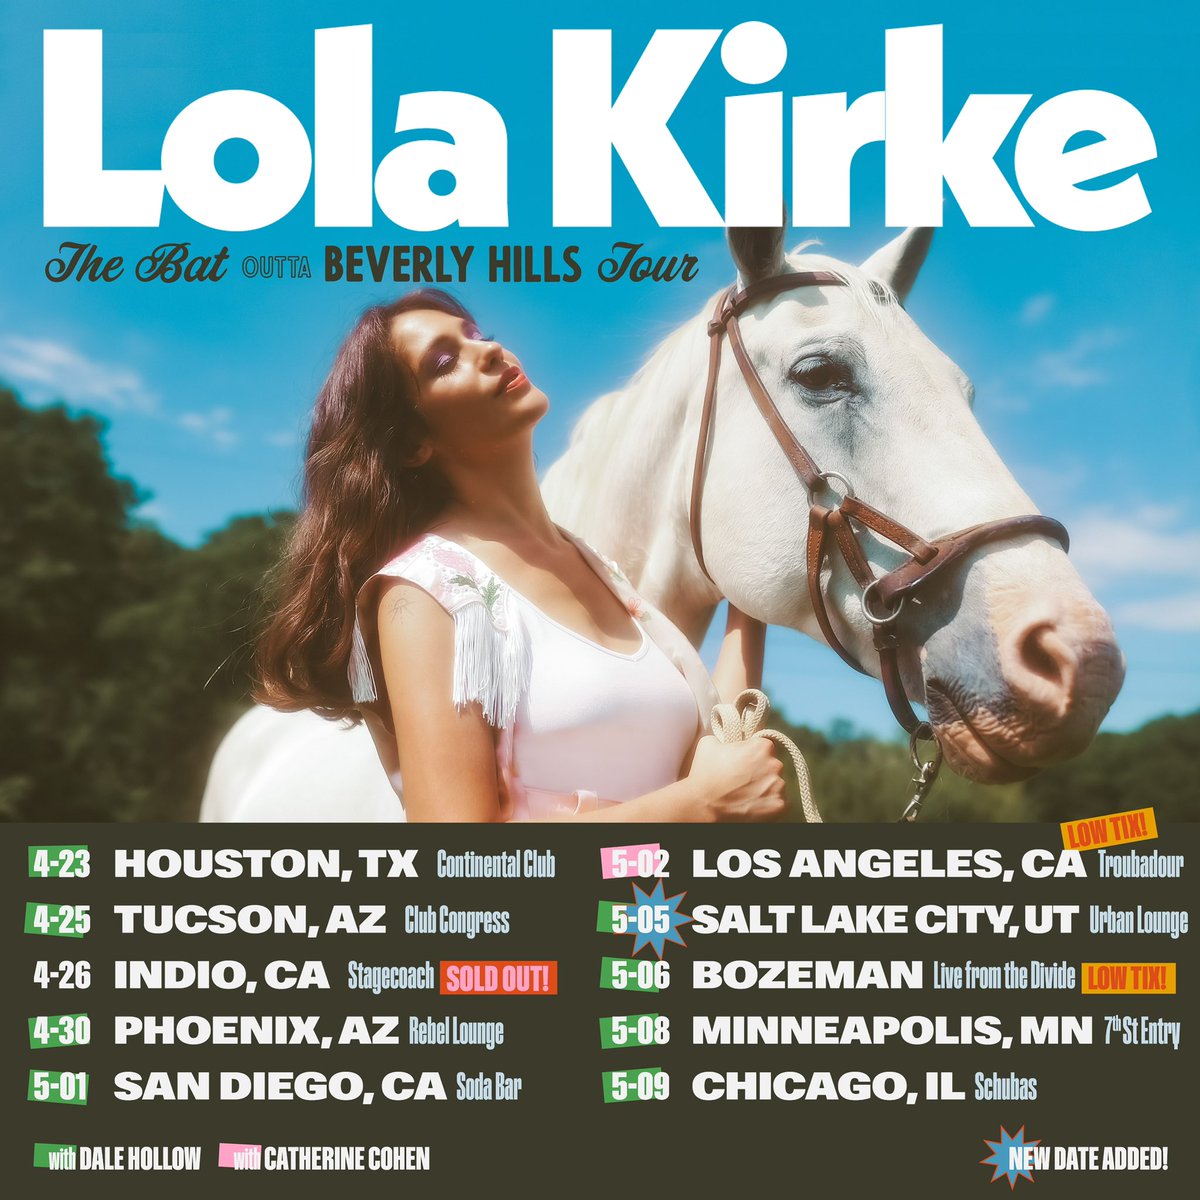 Low tix in Bozeman + LA! Grab yours before they’re gone… lolakirkemusic.com/tour